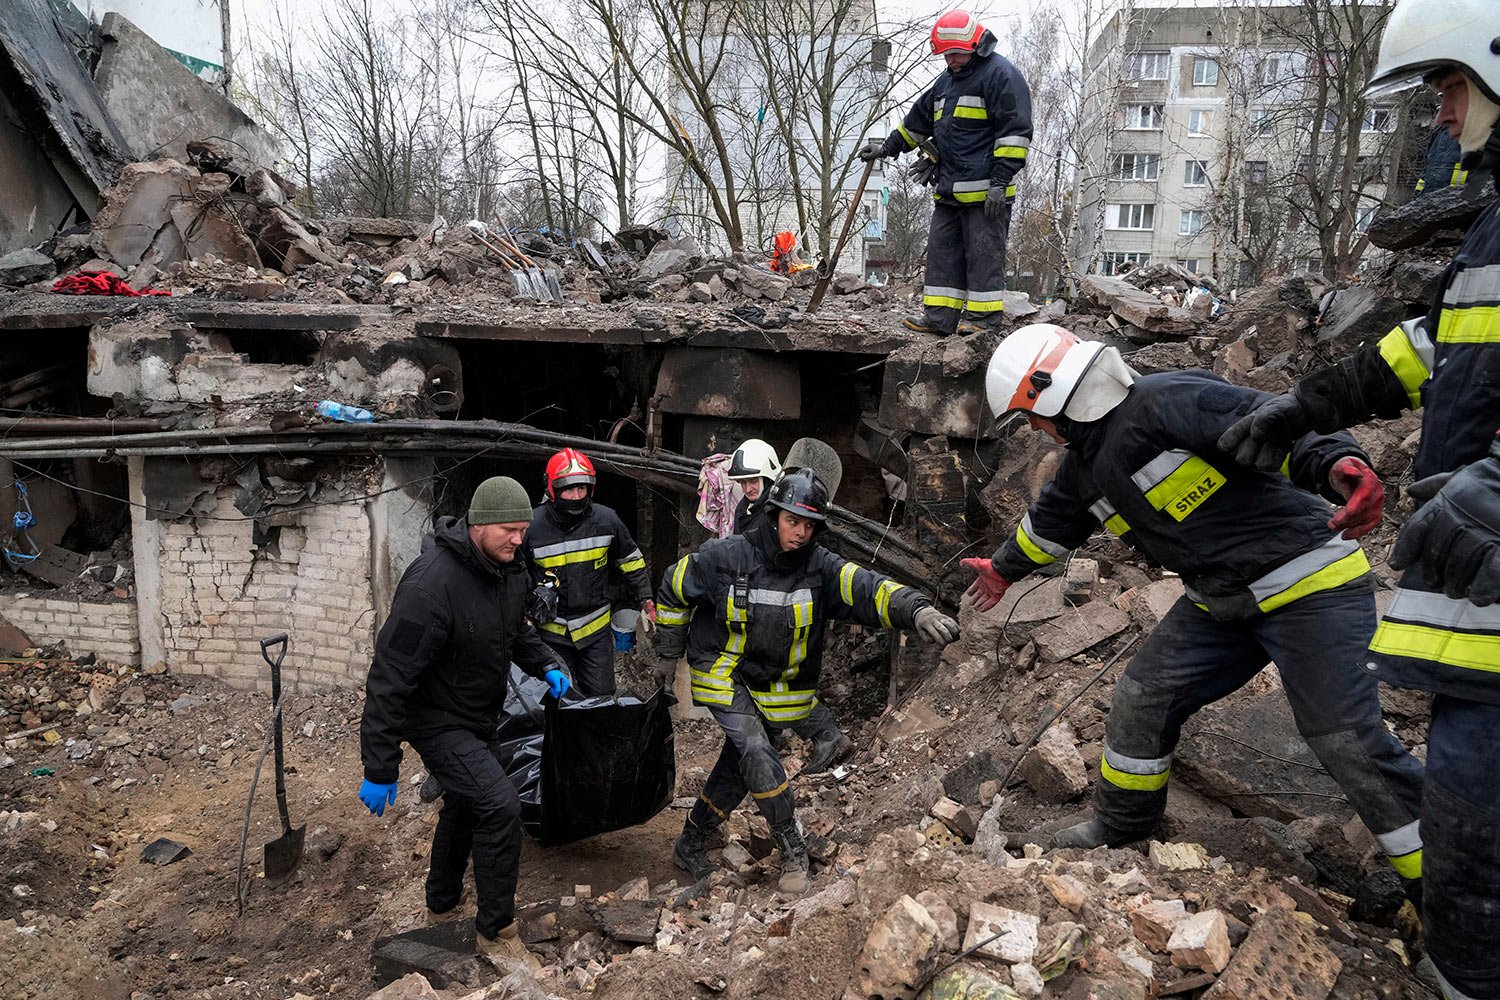  Emergency workers remove the body of a resident of a multi-storey building destroyed in a Russian air raid at the beginning of the Russia-Ukraine war in Borodyanka, close to Kyiv, Ukraine, Saturday, April 9, 2022.  (AP Photo/Efrem Lukatsky) 